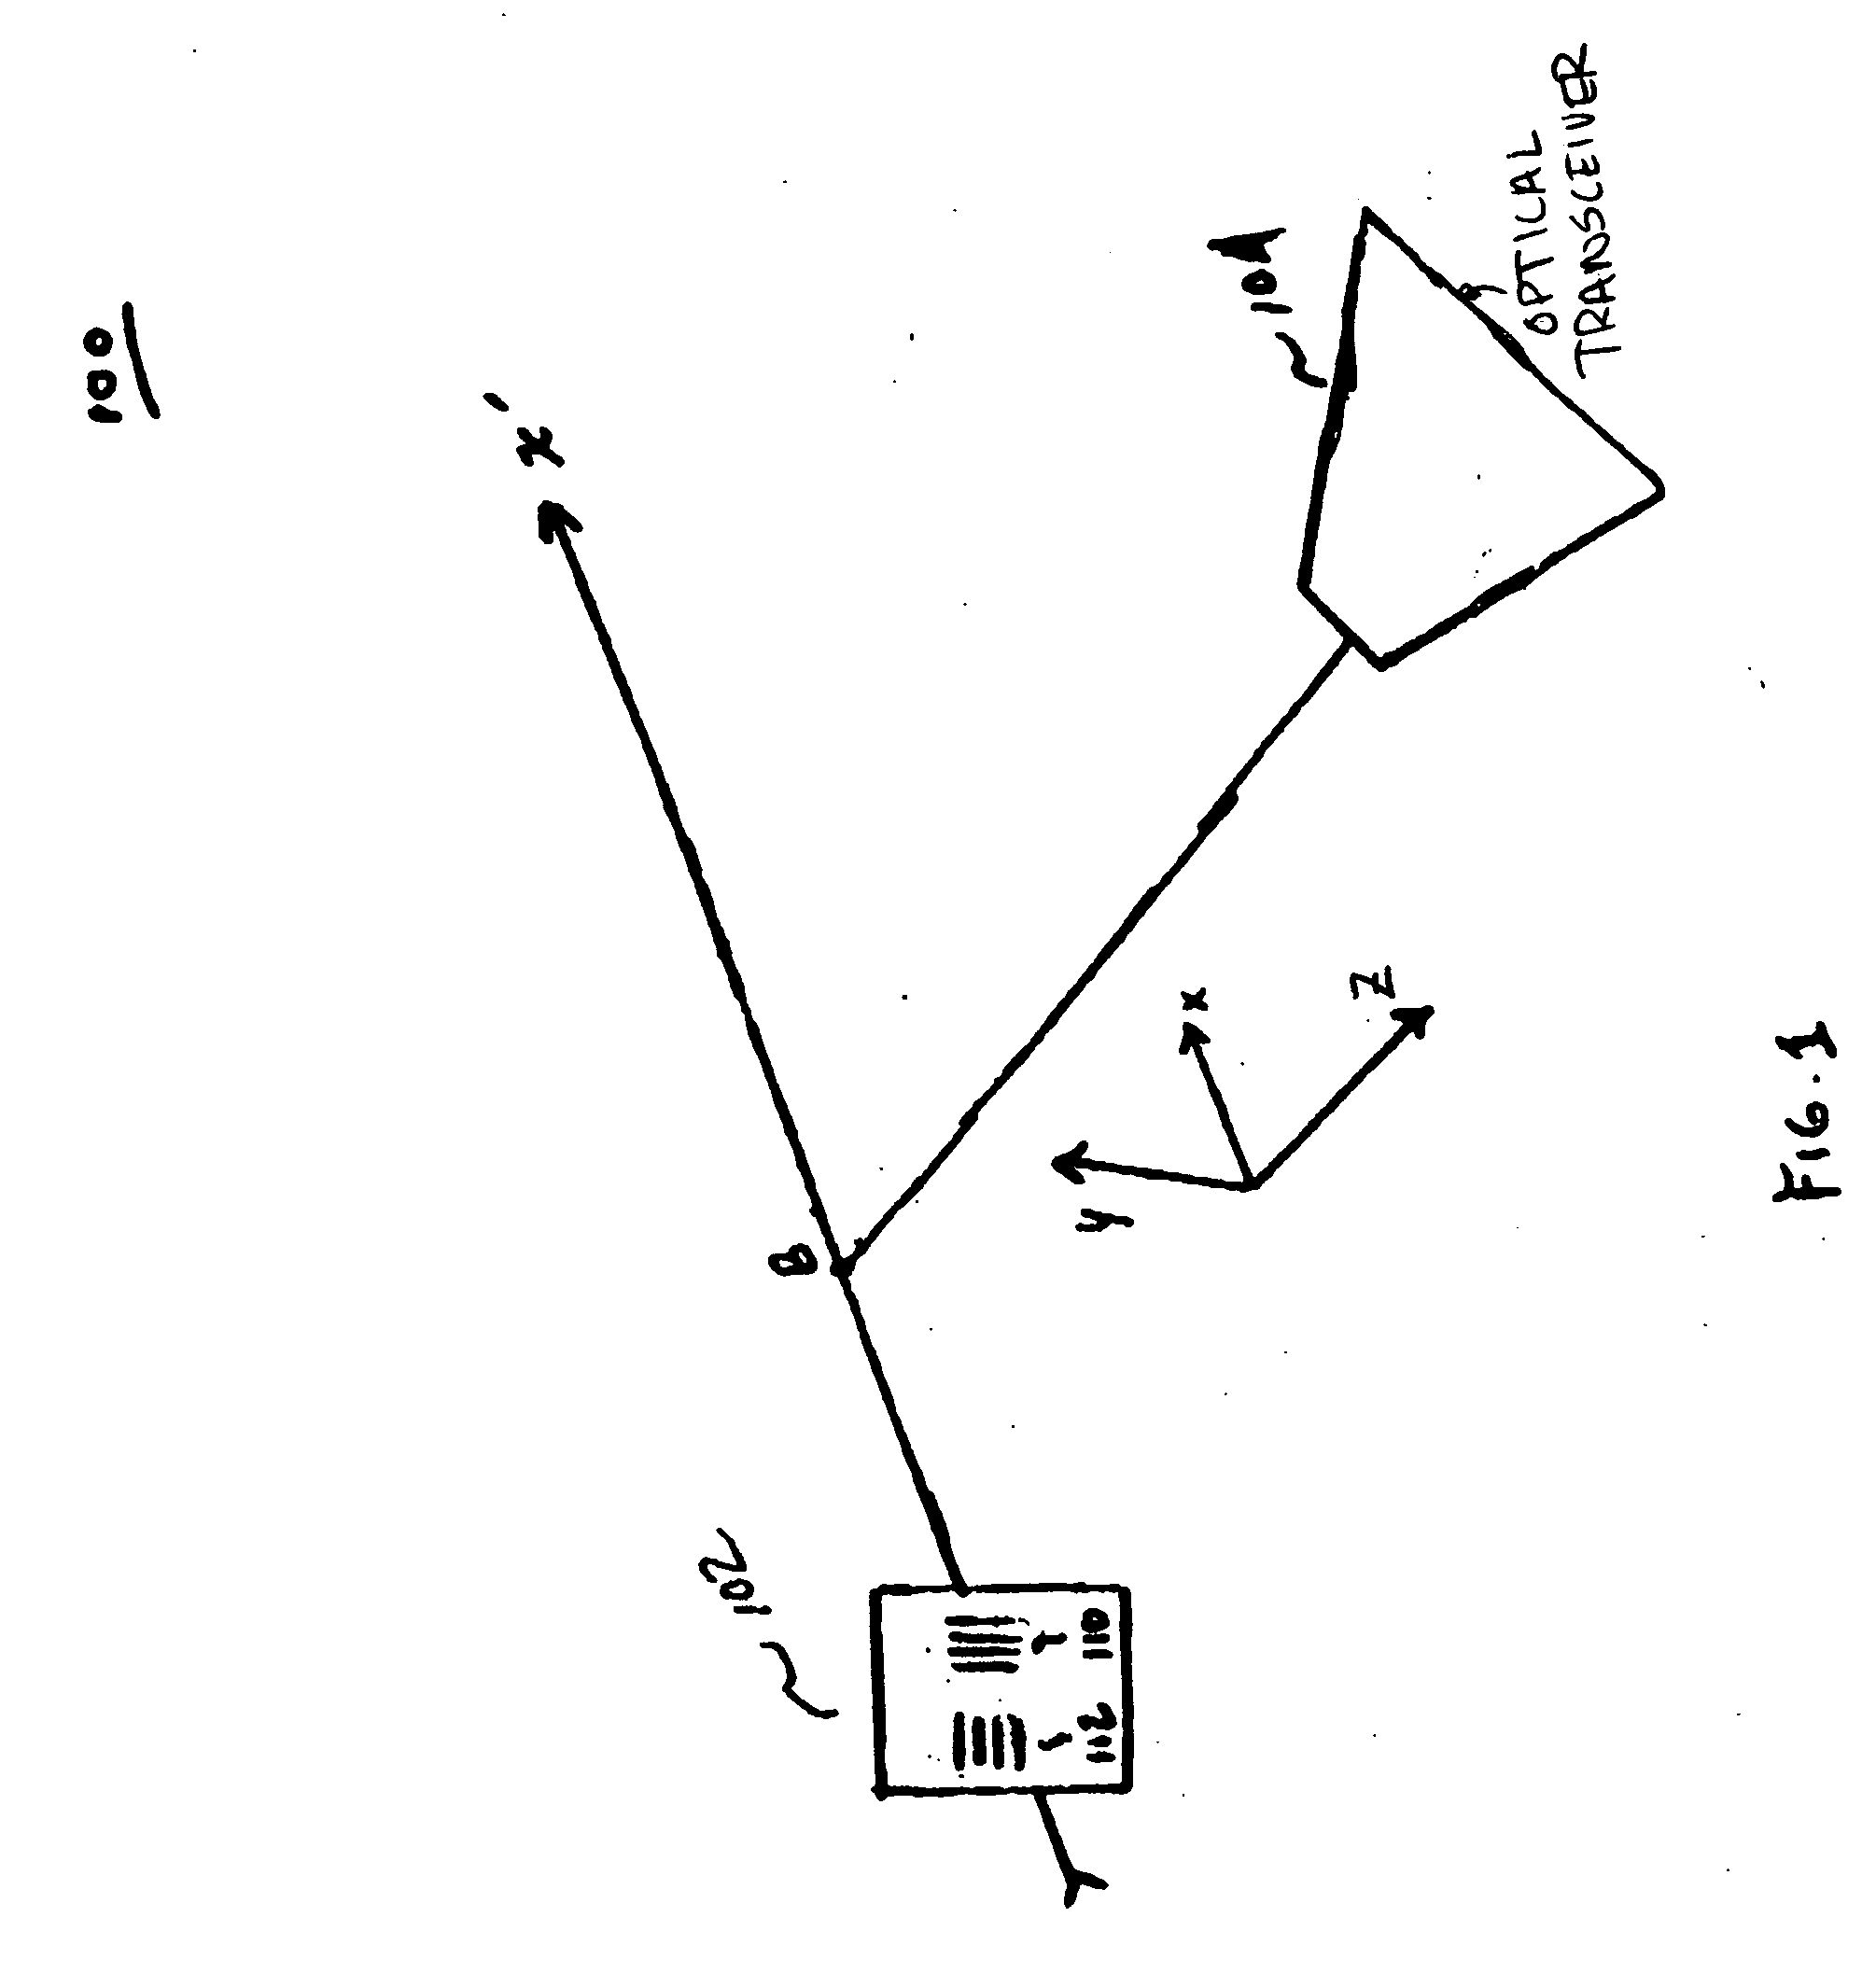 System and method for the measurement of the velocity and acceleration of objects